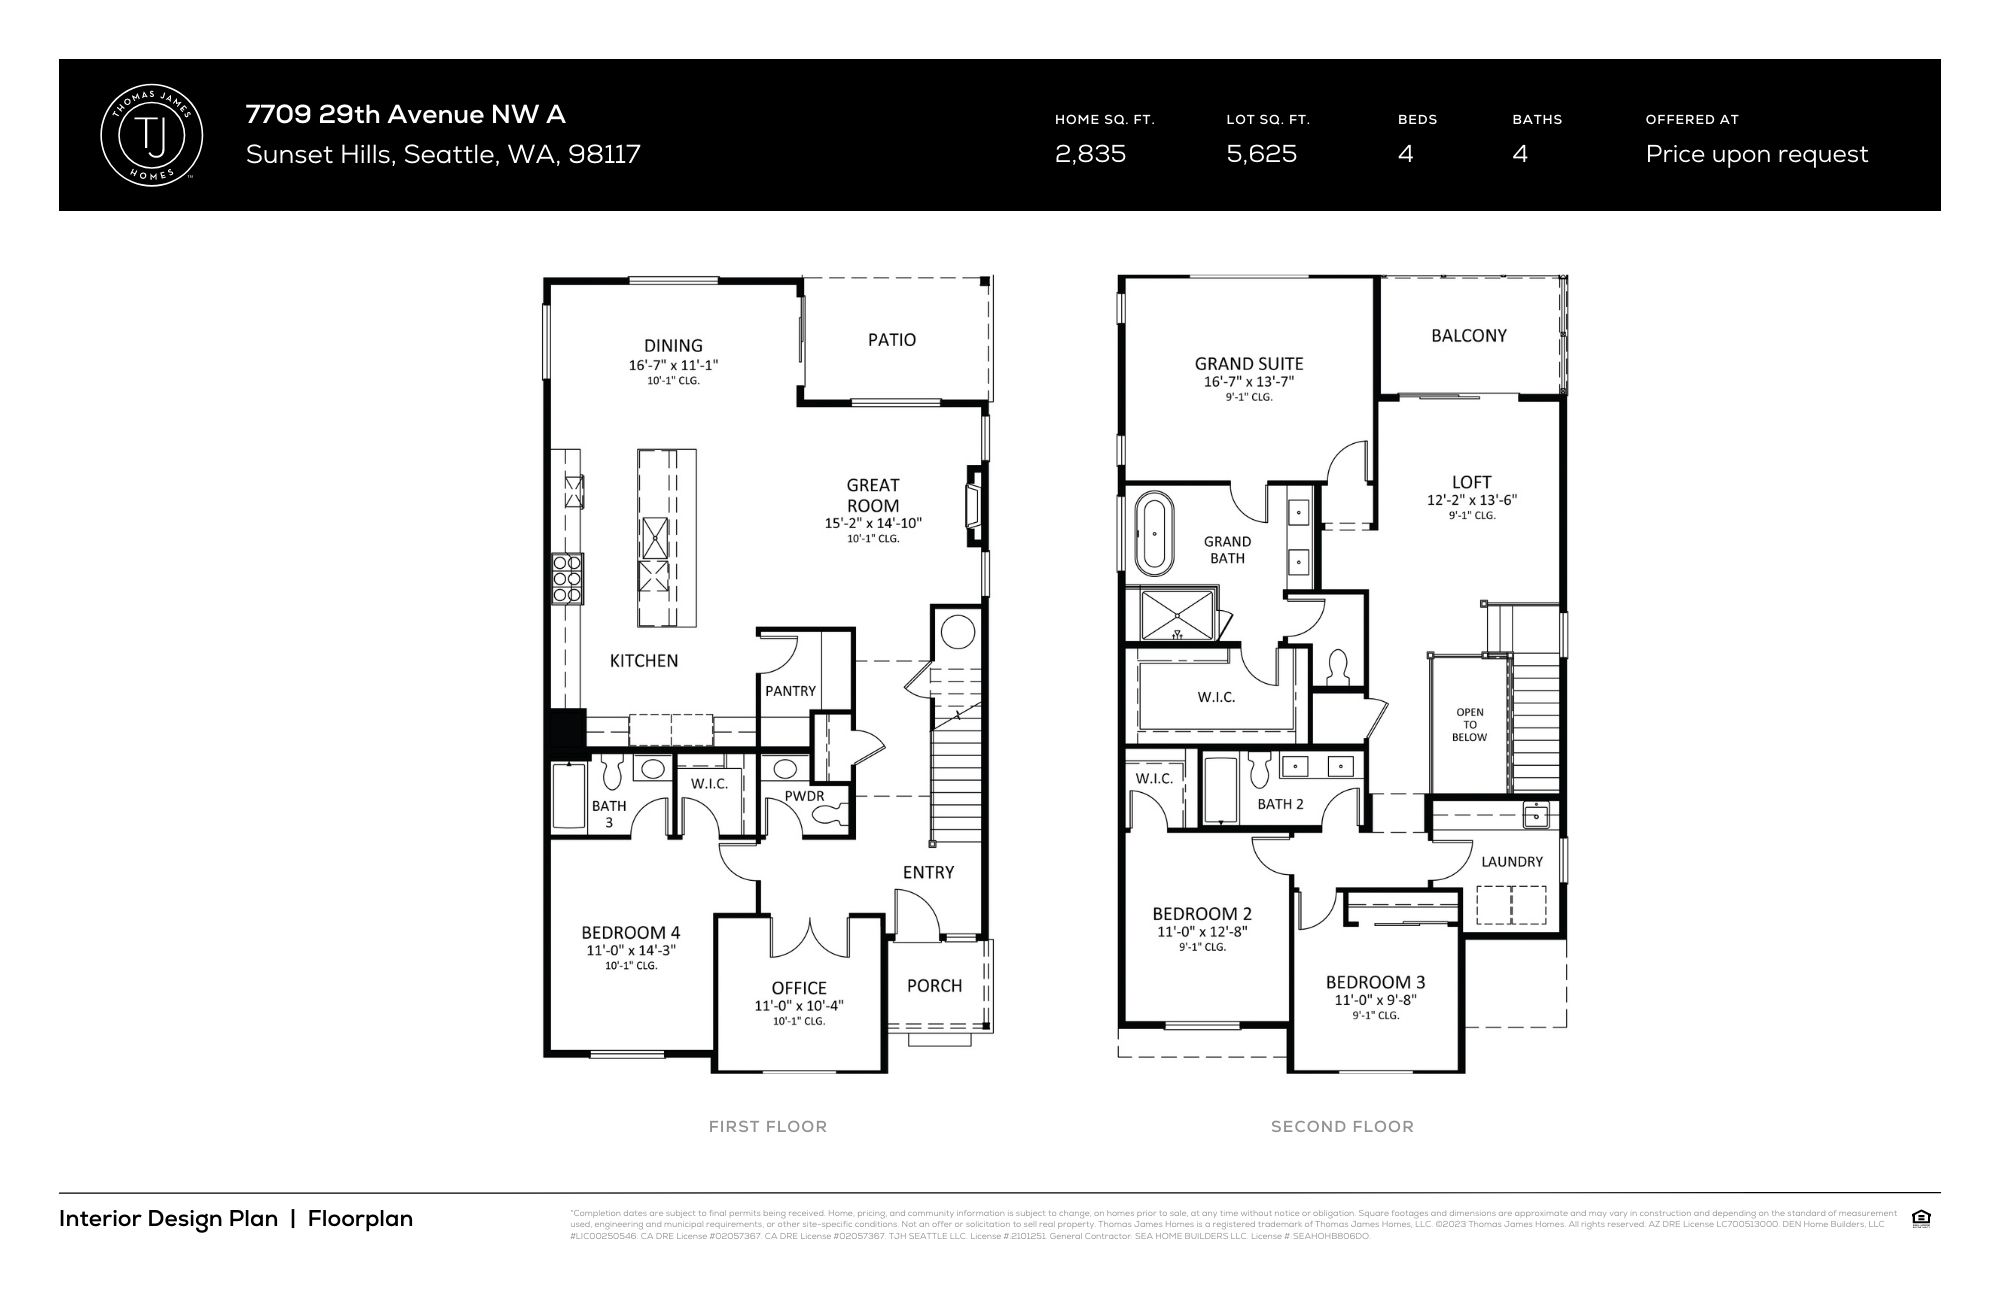 7709 29th Avenue NW A, Seattle, WA 98117 new home, image 8